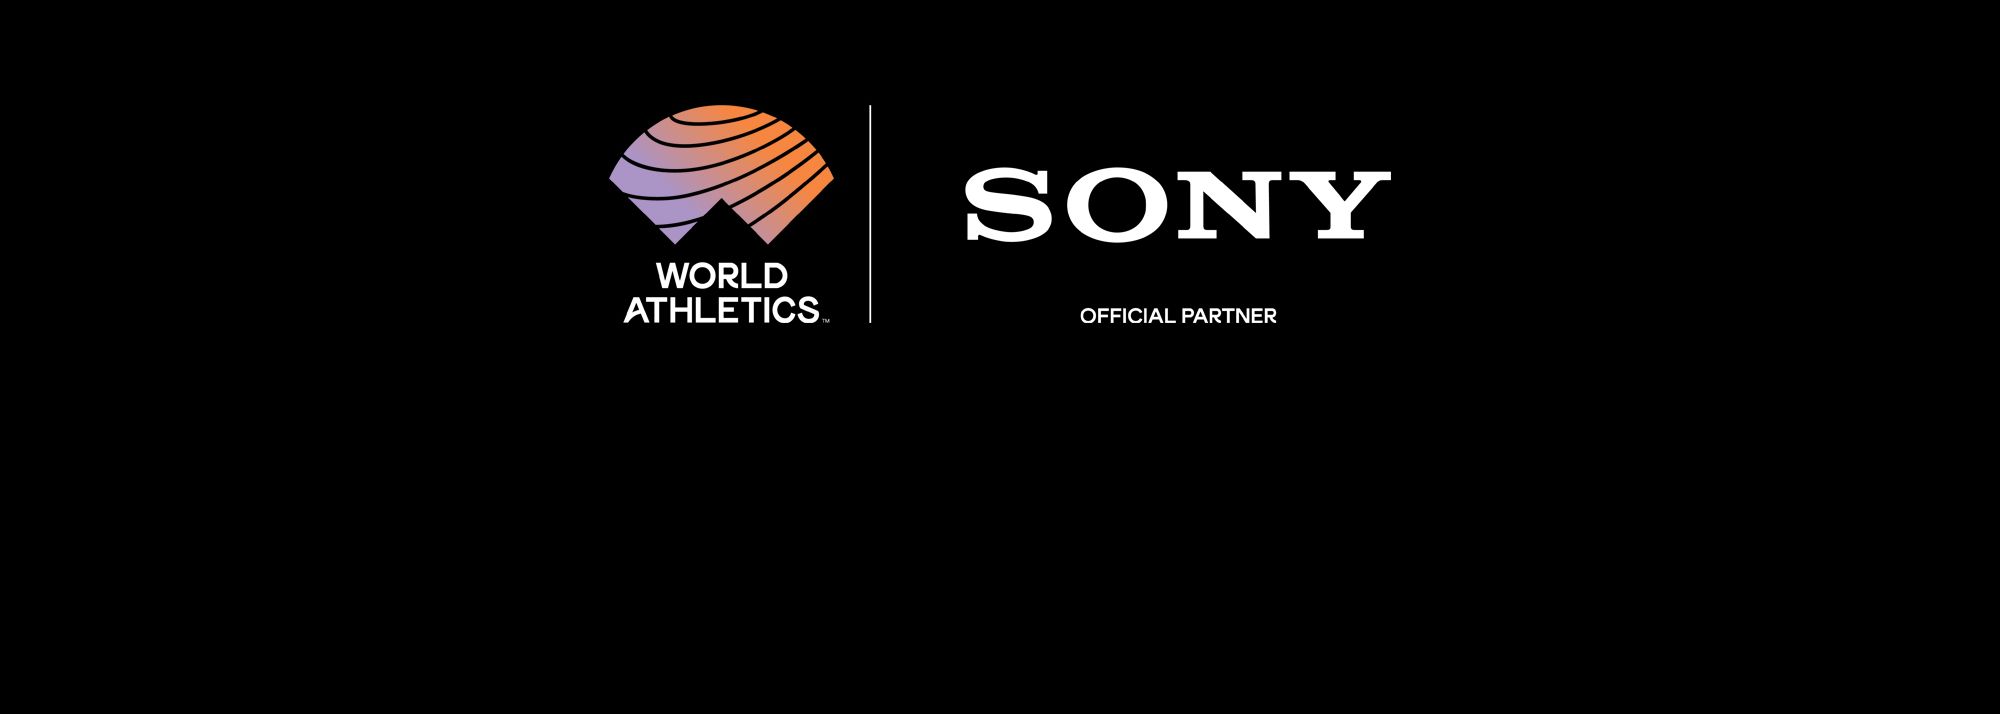 Three-year agreement includes the World Athletics Championships Tokyo 25 and leverages technology to create emotion-filled sports experiences